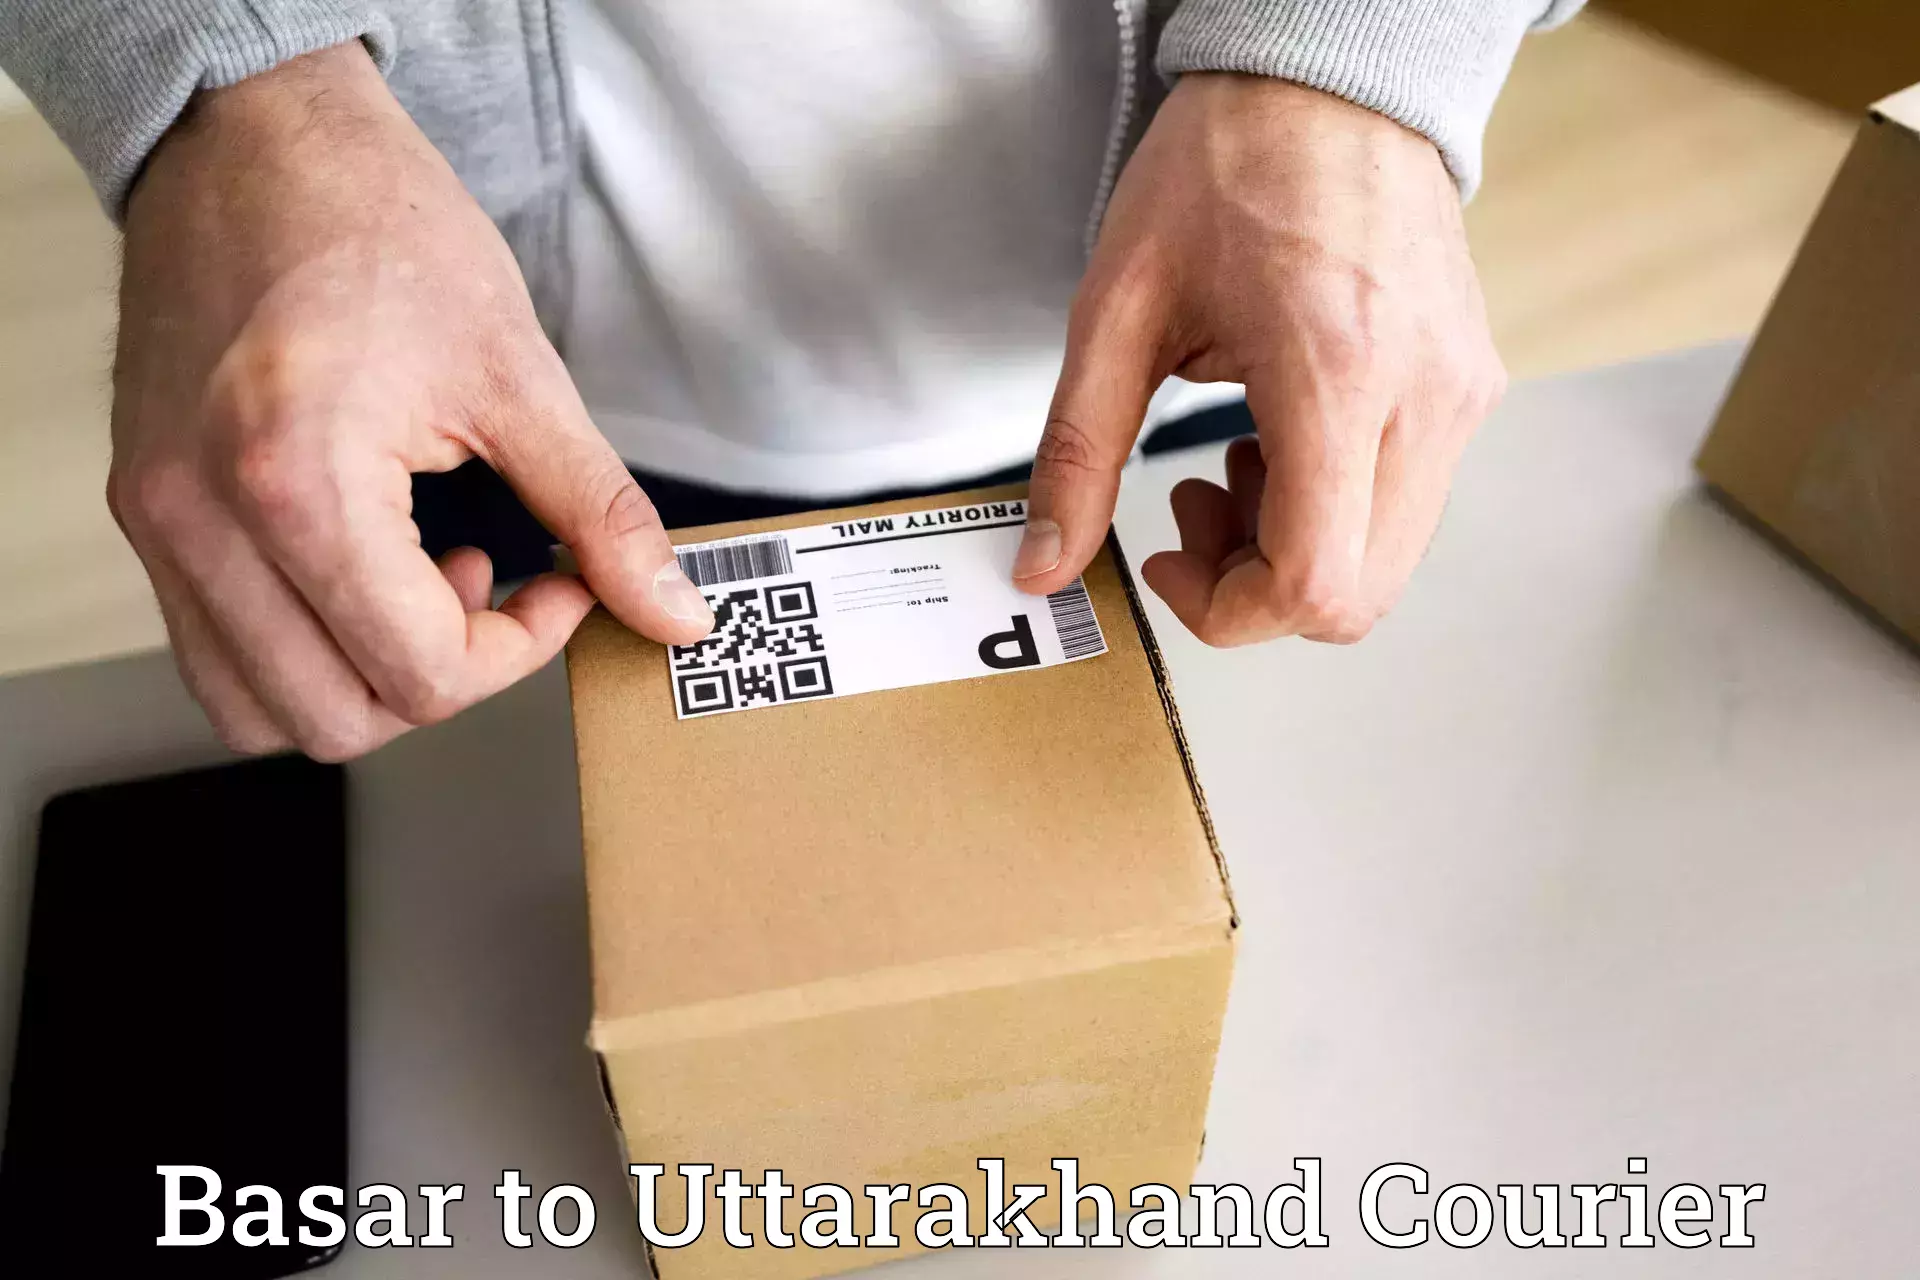 Courier service efficiency Basar to Uttarakhand